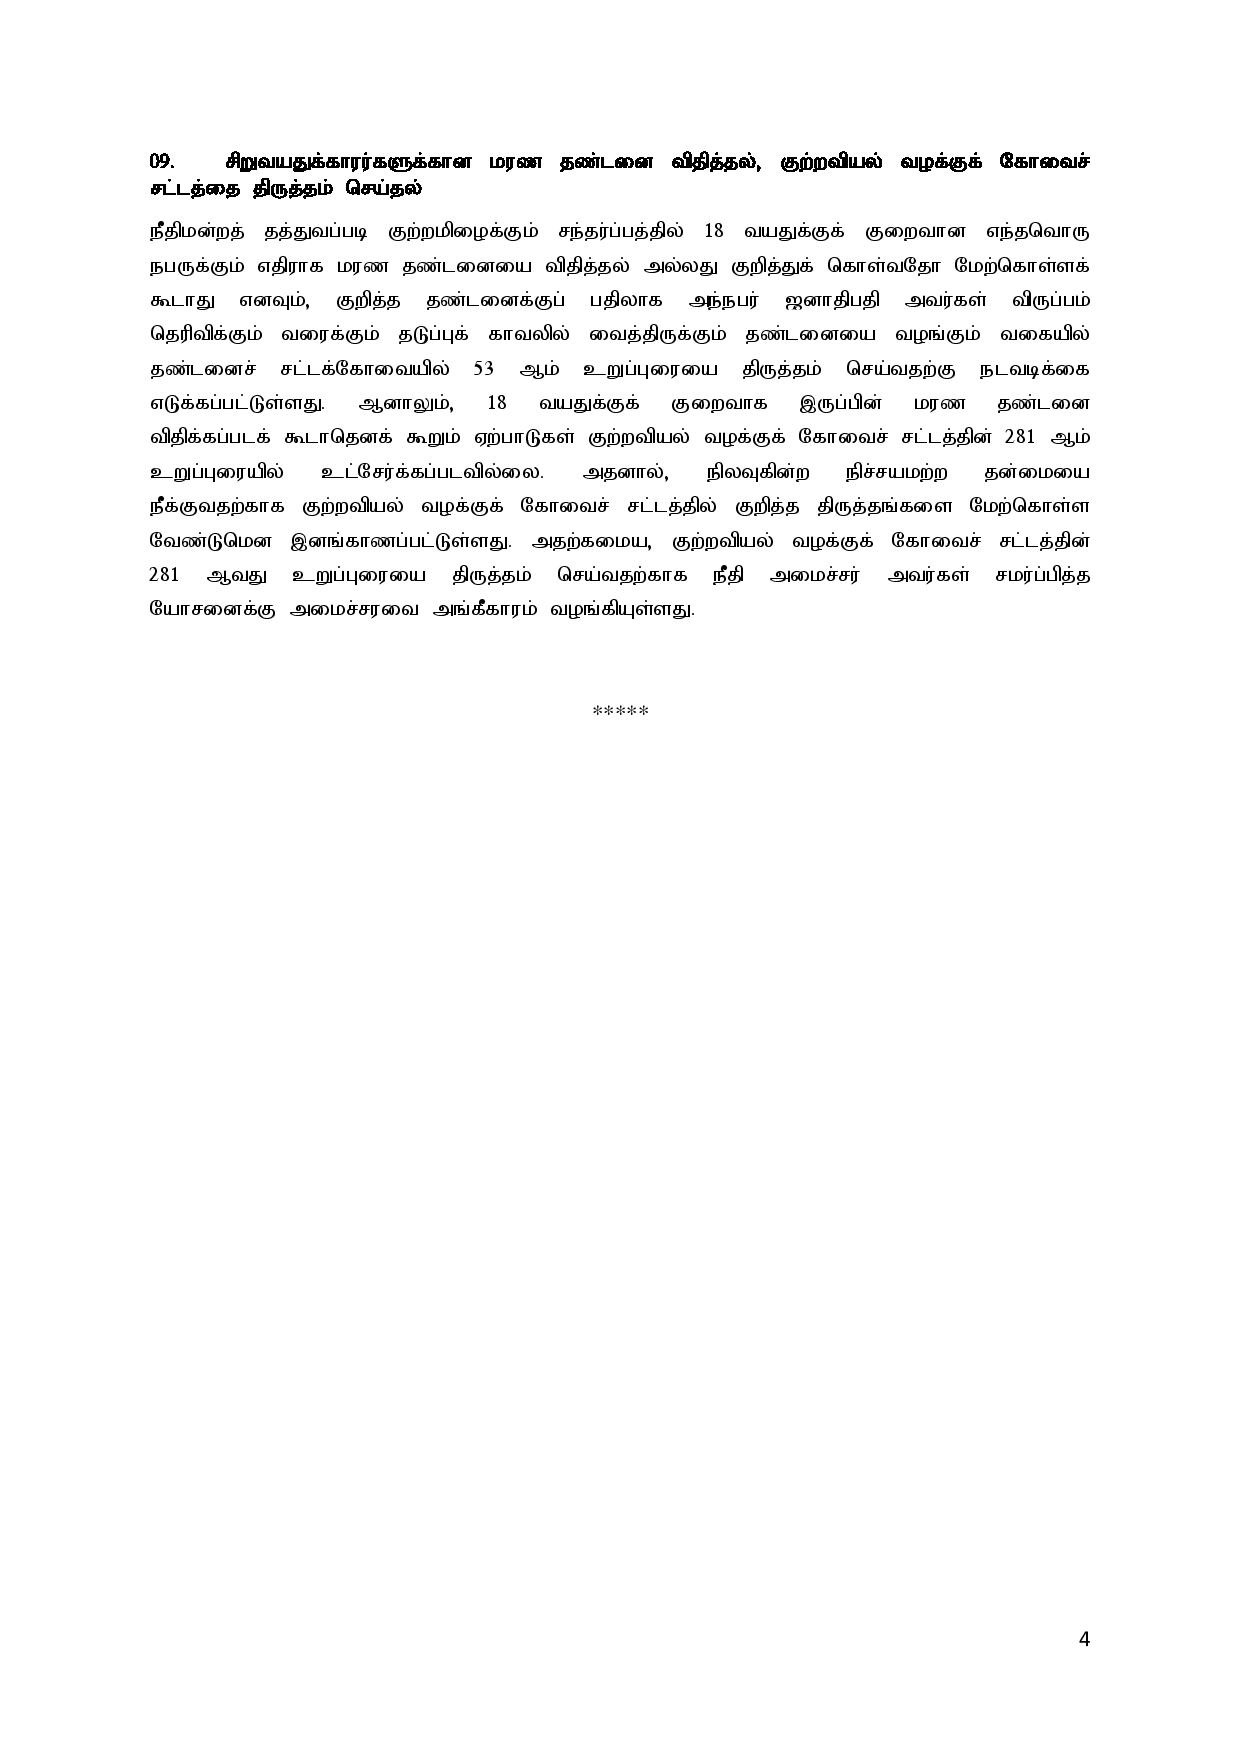 Cabinet Decisions on 13.12.2021 Tamil page 004